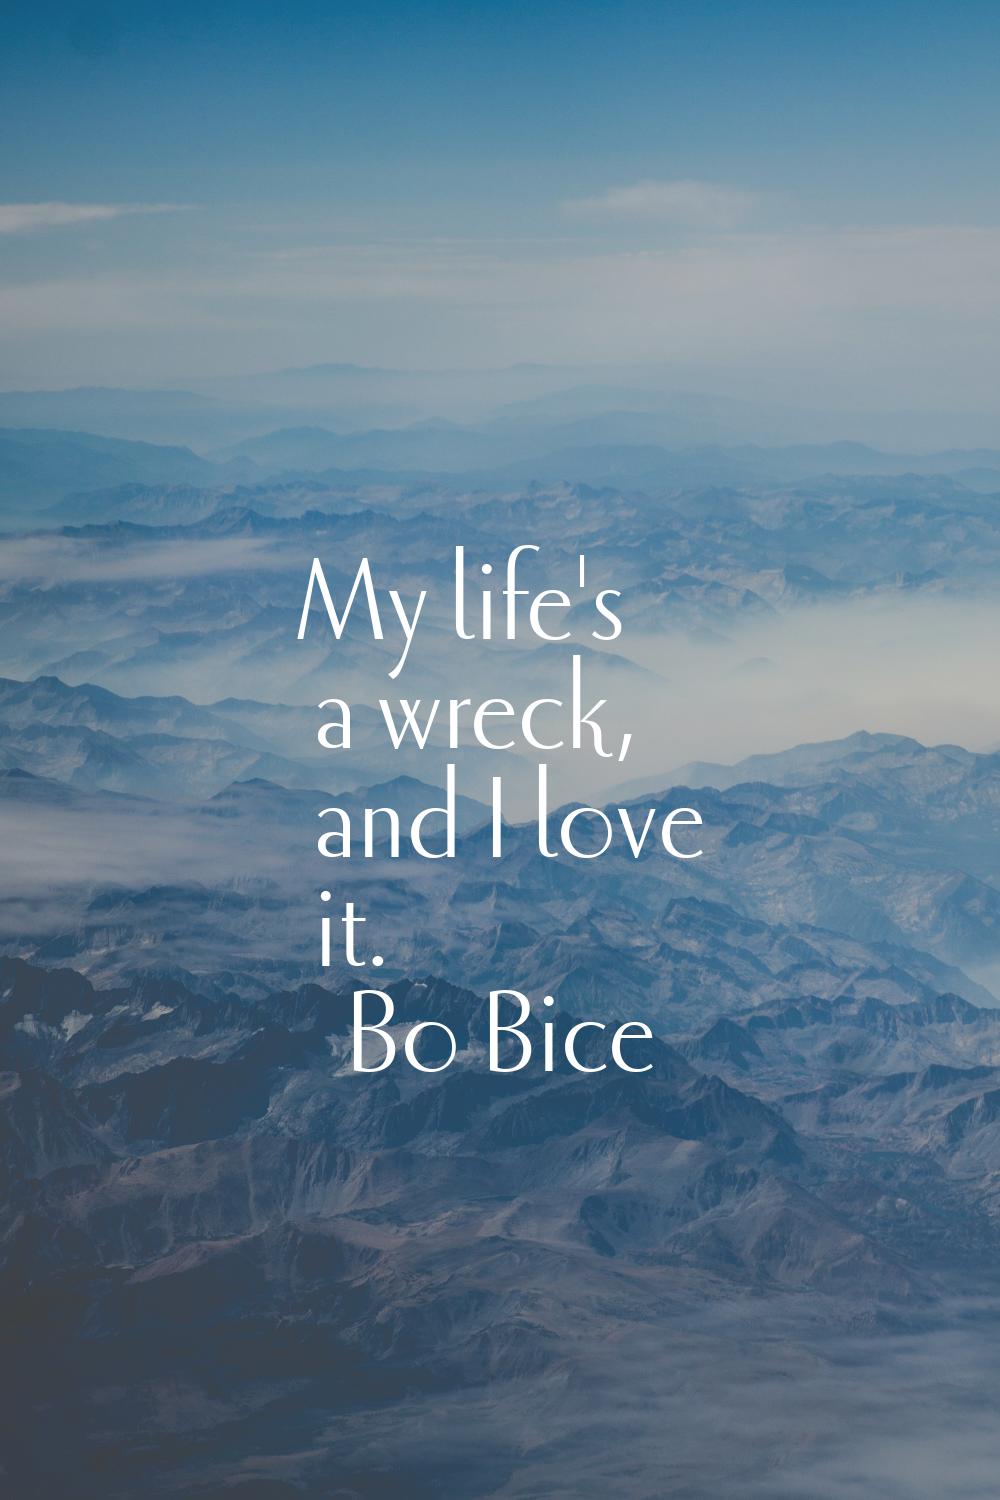 My life's a wreck, and I love it.